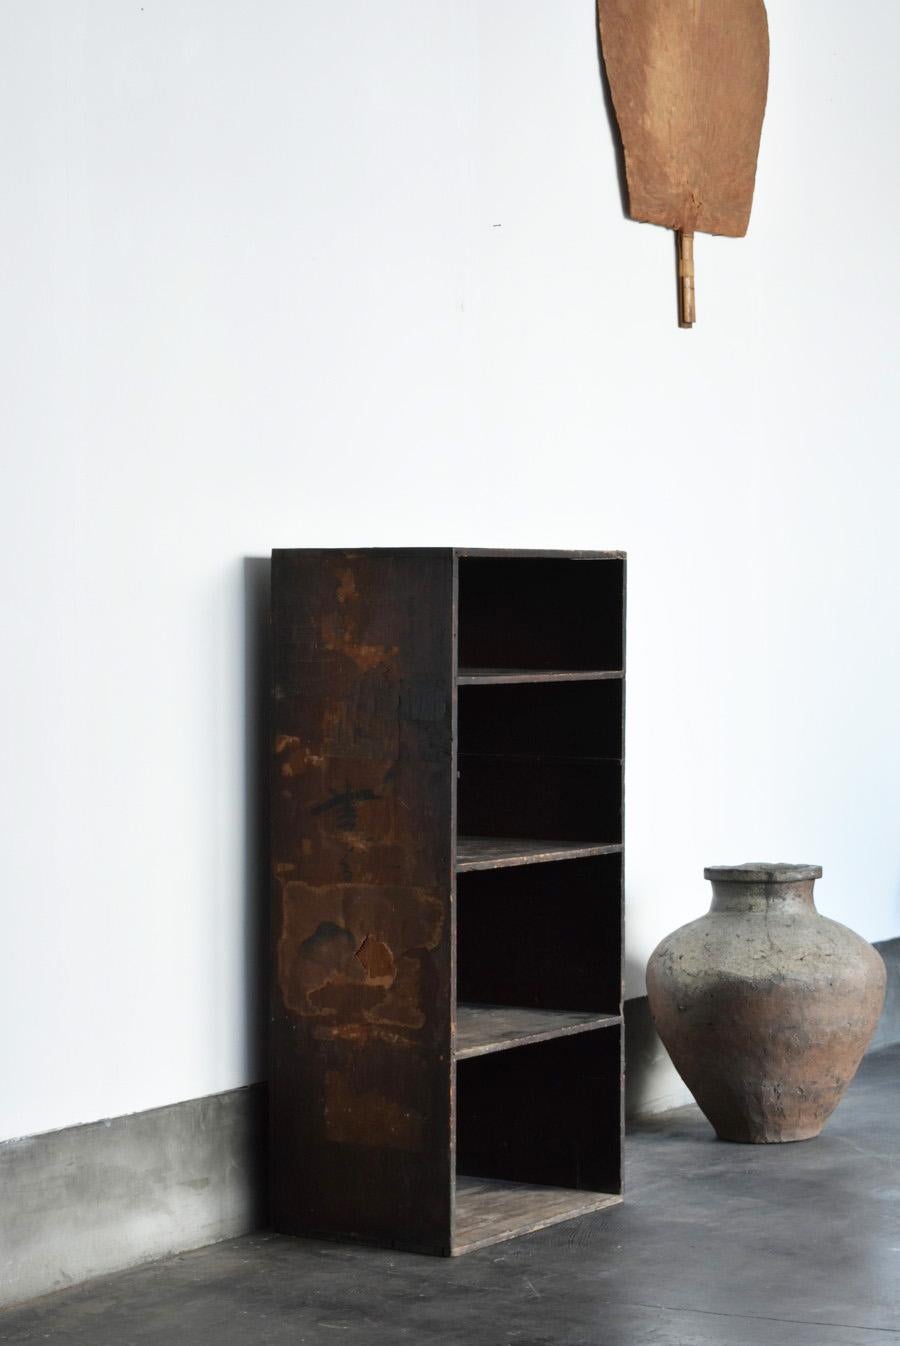 This is a very simple Japanese wooden shelf.
It may have been used as a store.
On the side of the shelf is written in Chinese characters ``Meiji 19'', which means it was made in 1886.

It's a very nice shelf.
Things like this are becoming rarer and